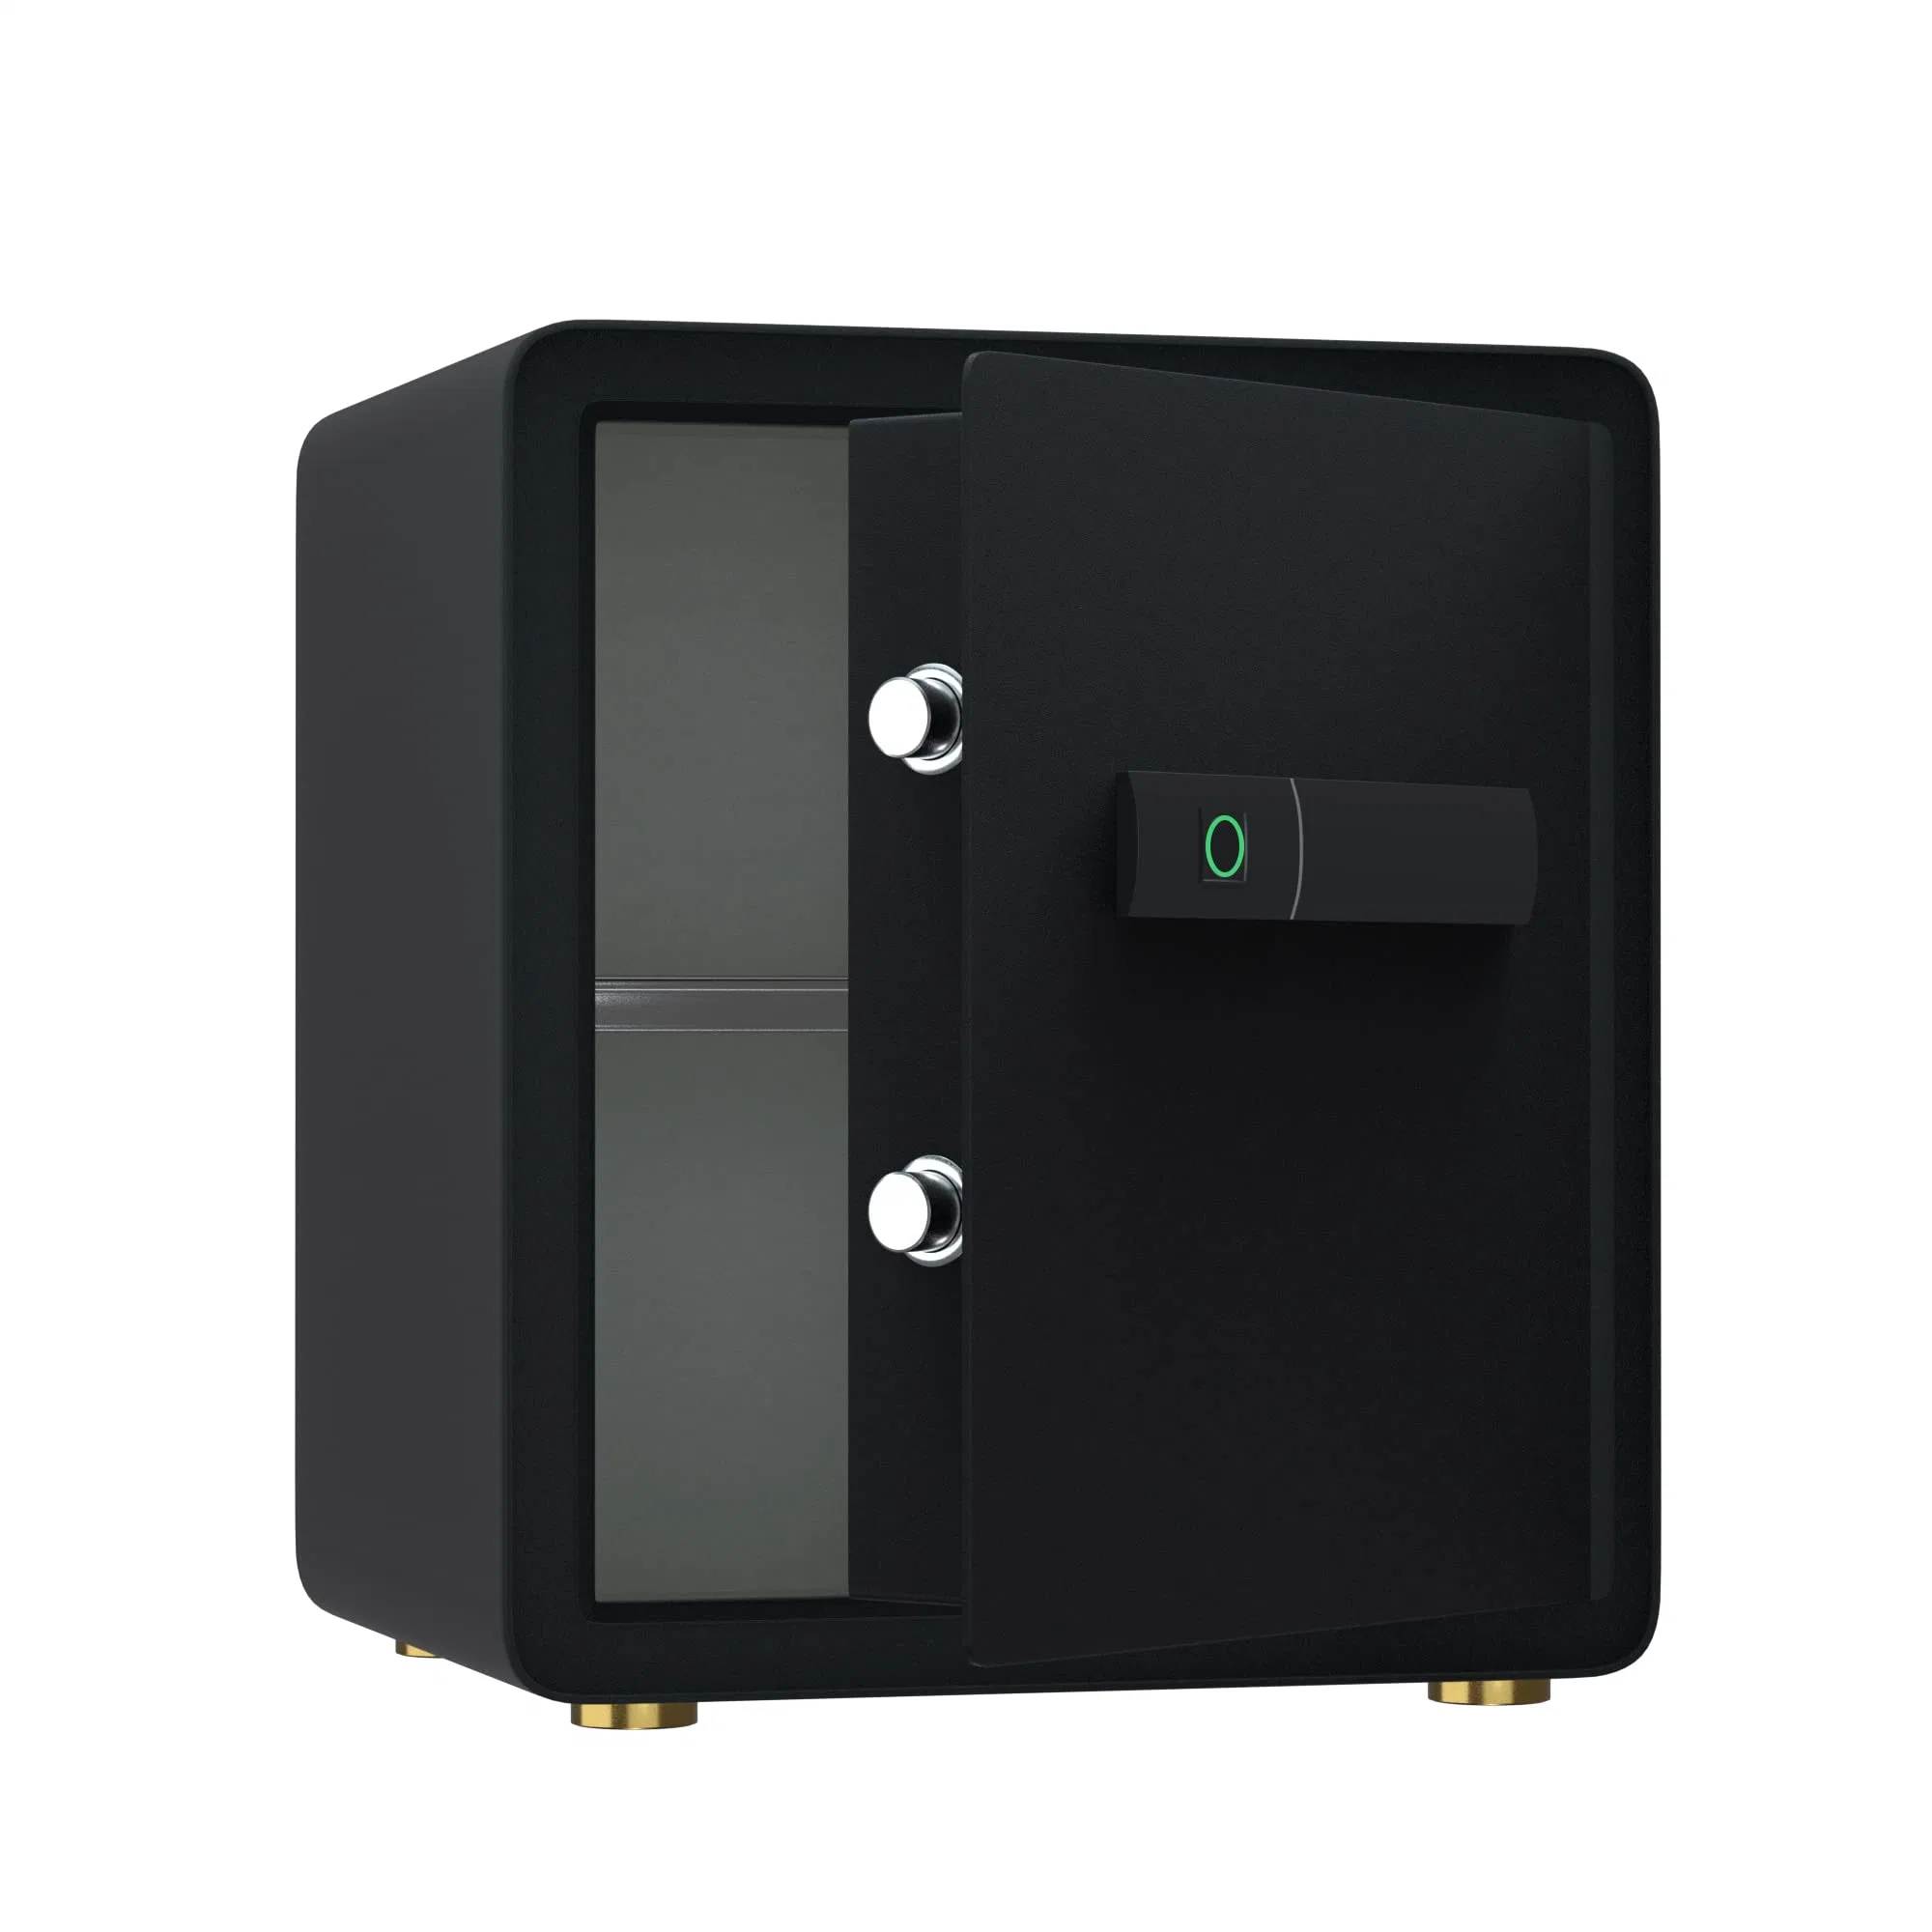 High Quality Fingerprint Lock Home Safe Box for Secure Money / Jewelry / Document